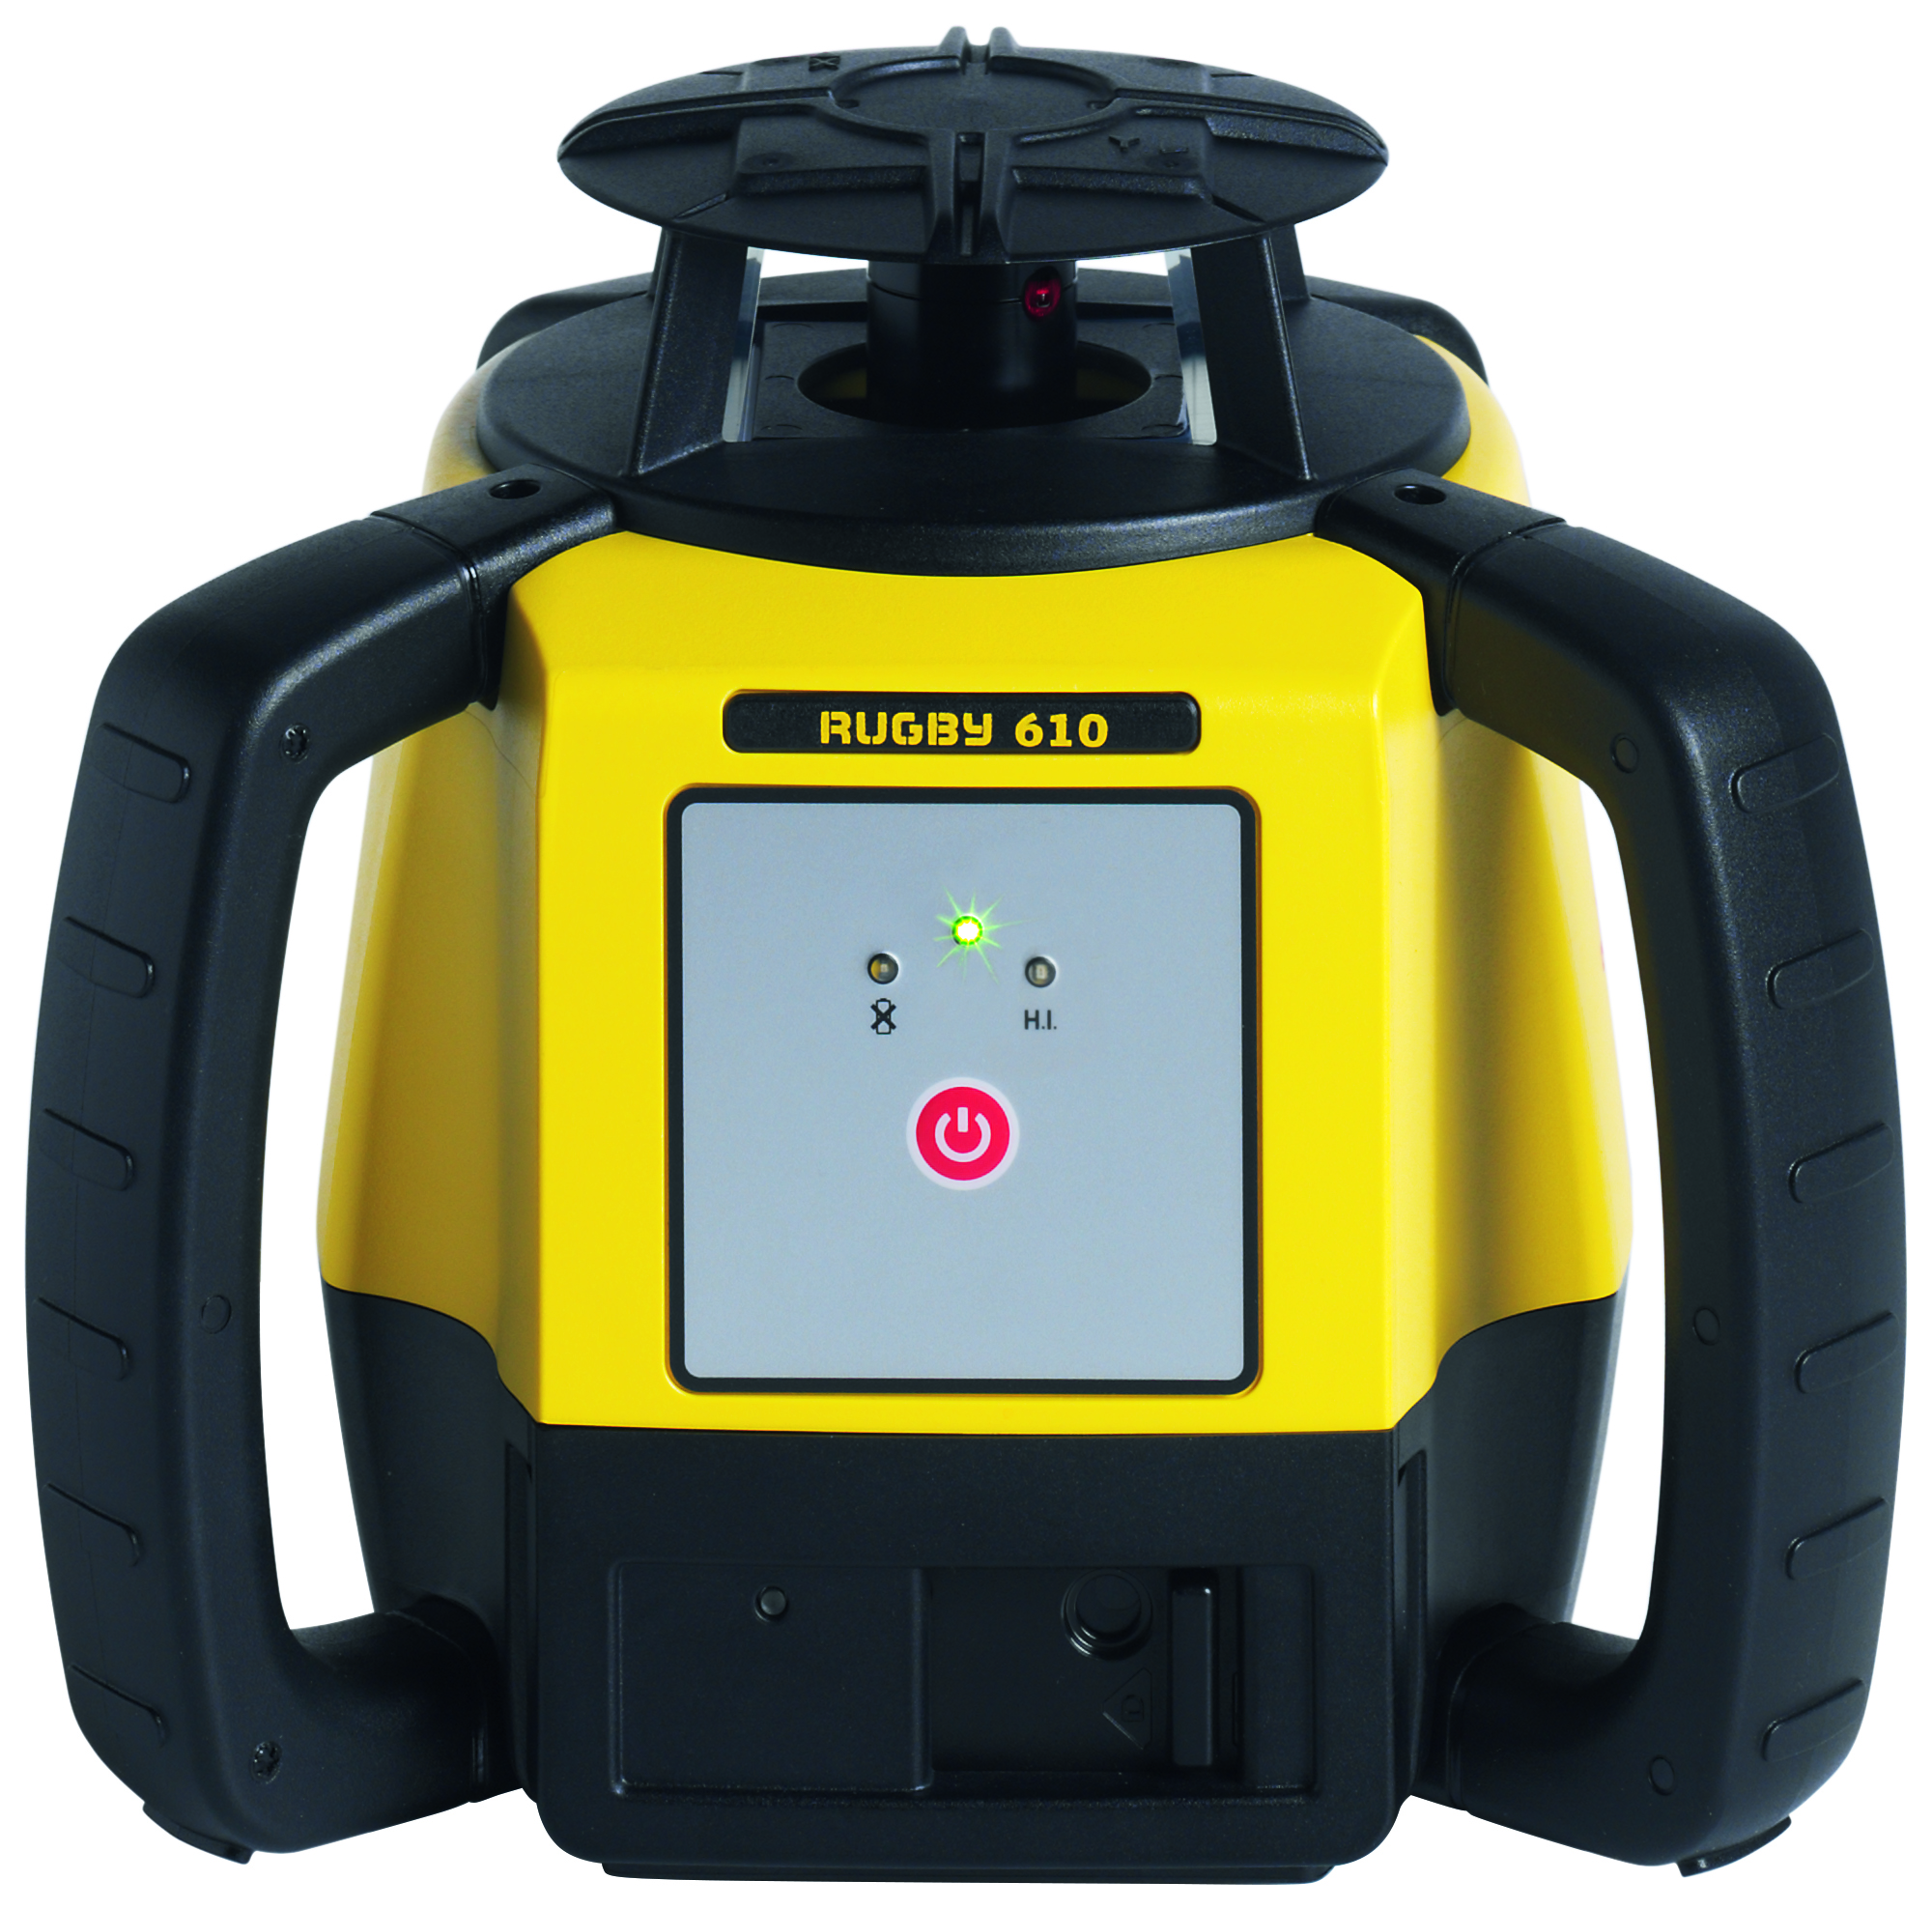 Image of Leica Rugby 610 RE120 Alkaline Self Levelling Rotating Laser Level